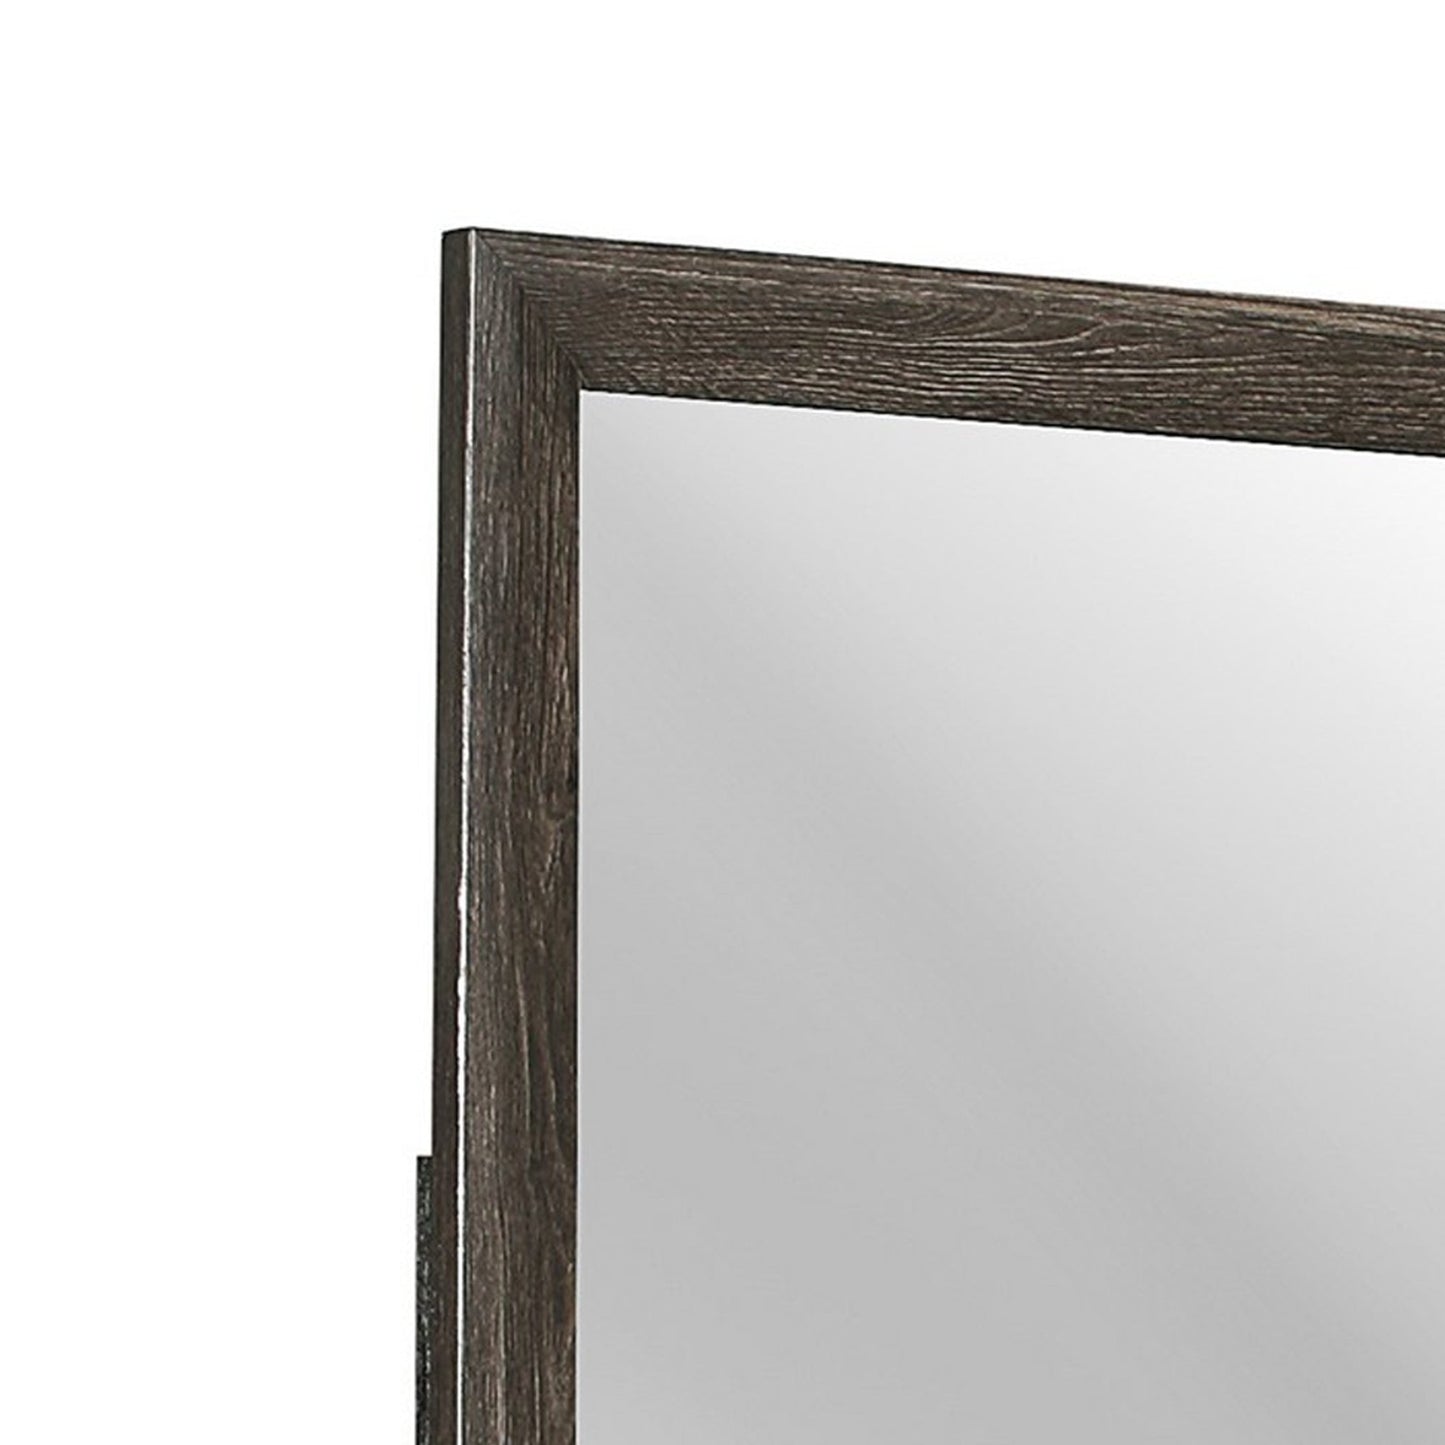 Benzara Dark Gray and Silver Square Wooden Frame Mirror With Mounting Hardware